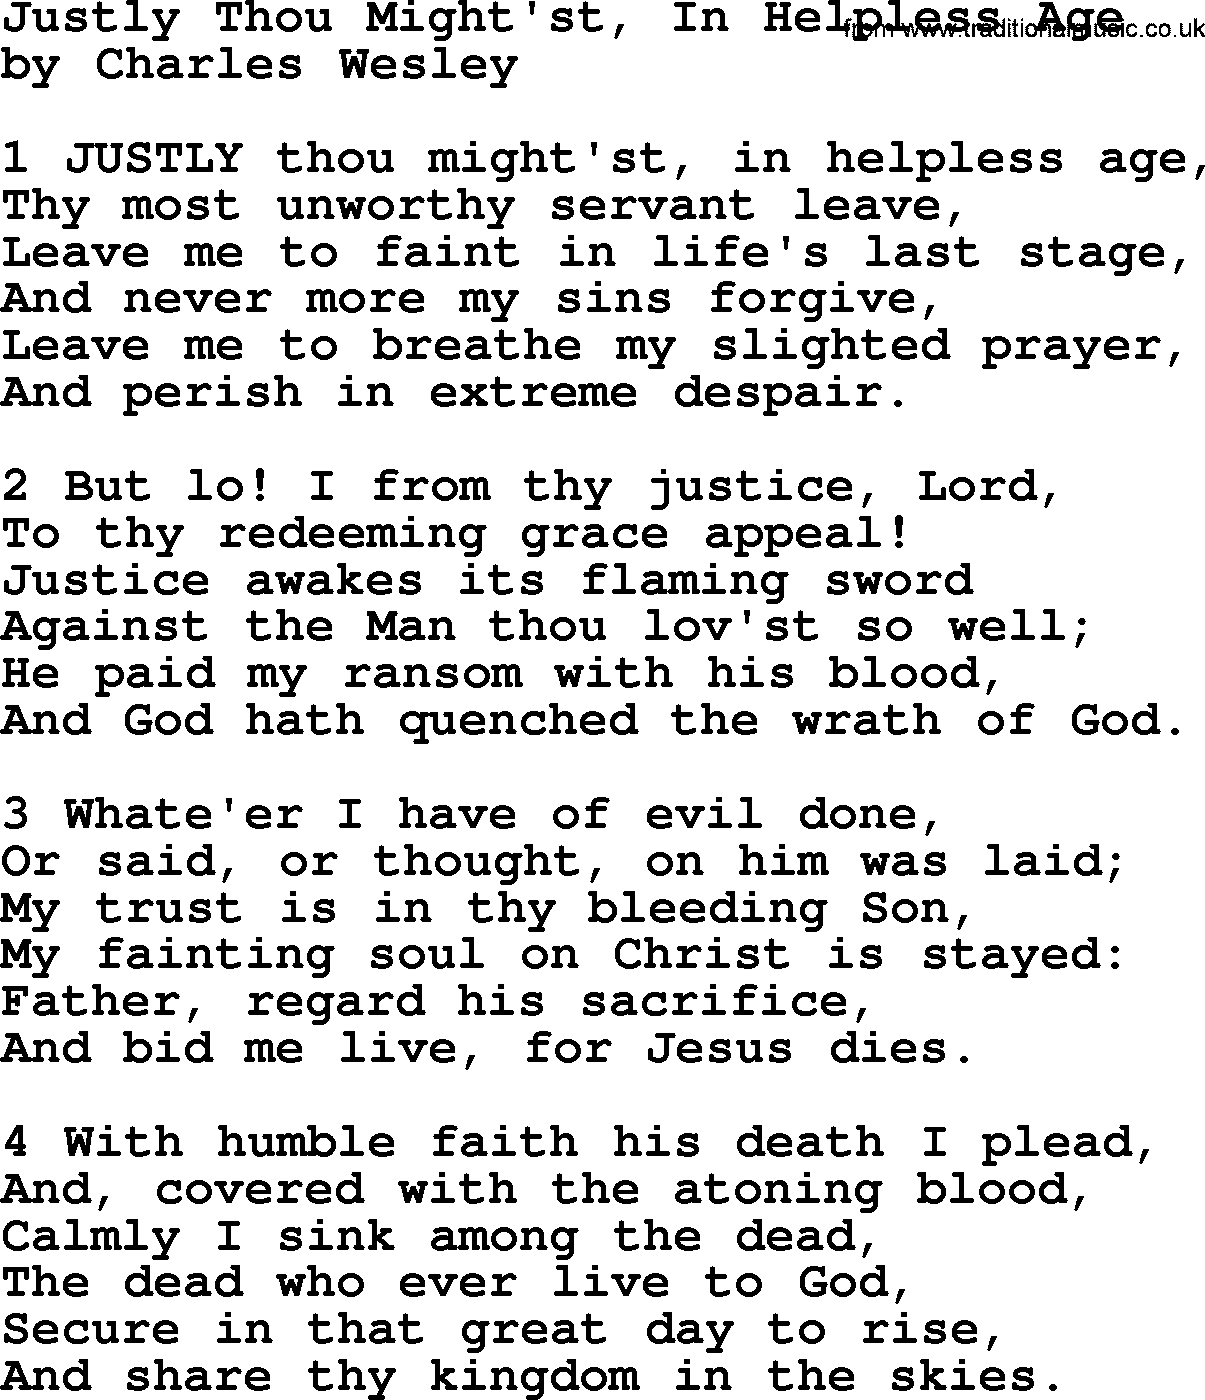 Charles Wesley hymn: Justly Thou Might'st, In Helpless Age, lyrics